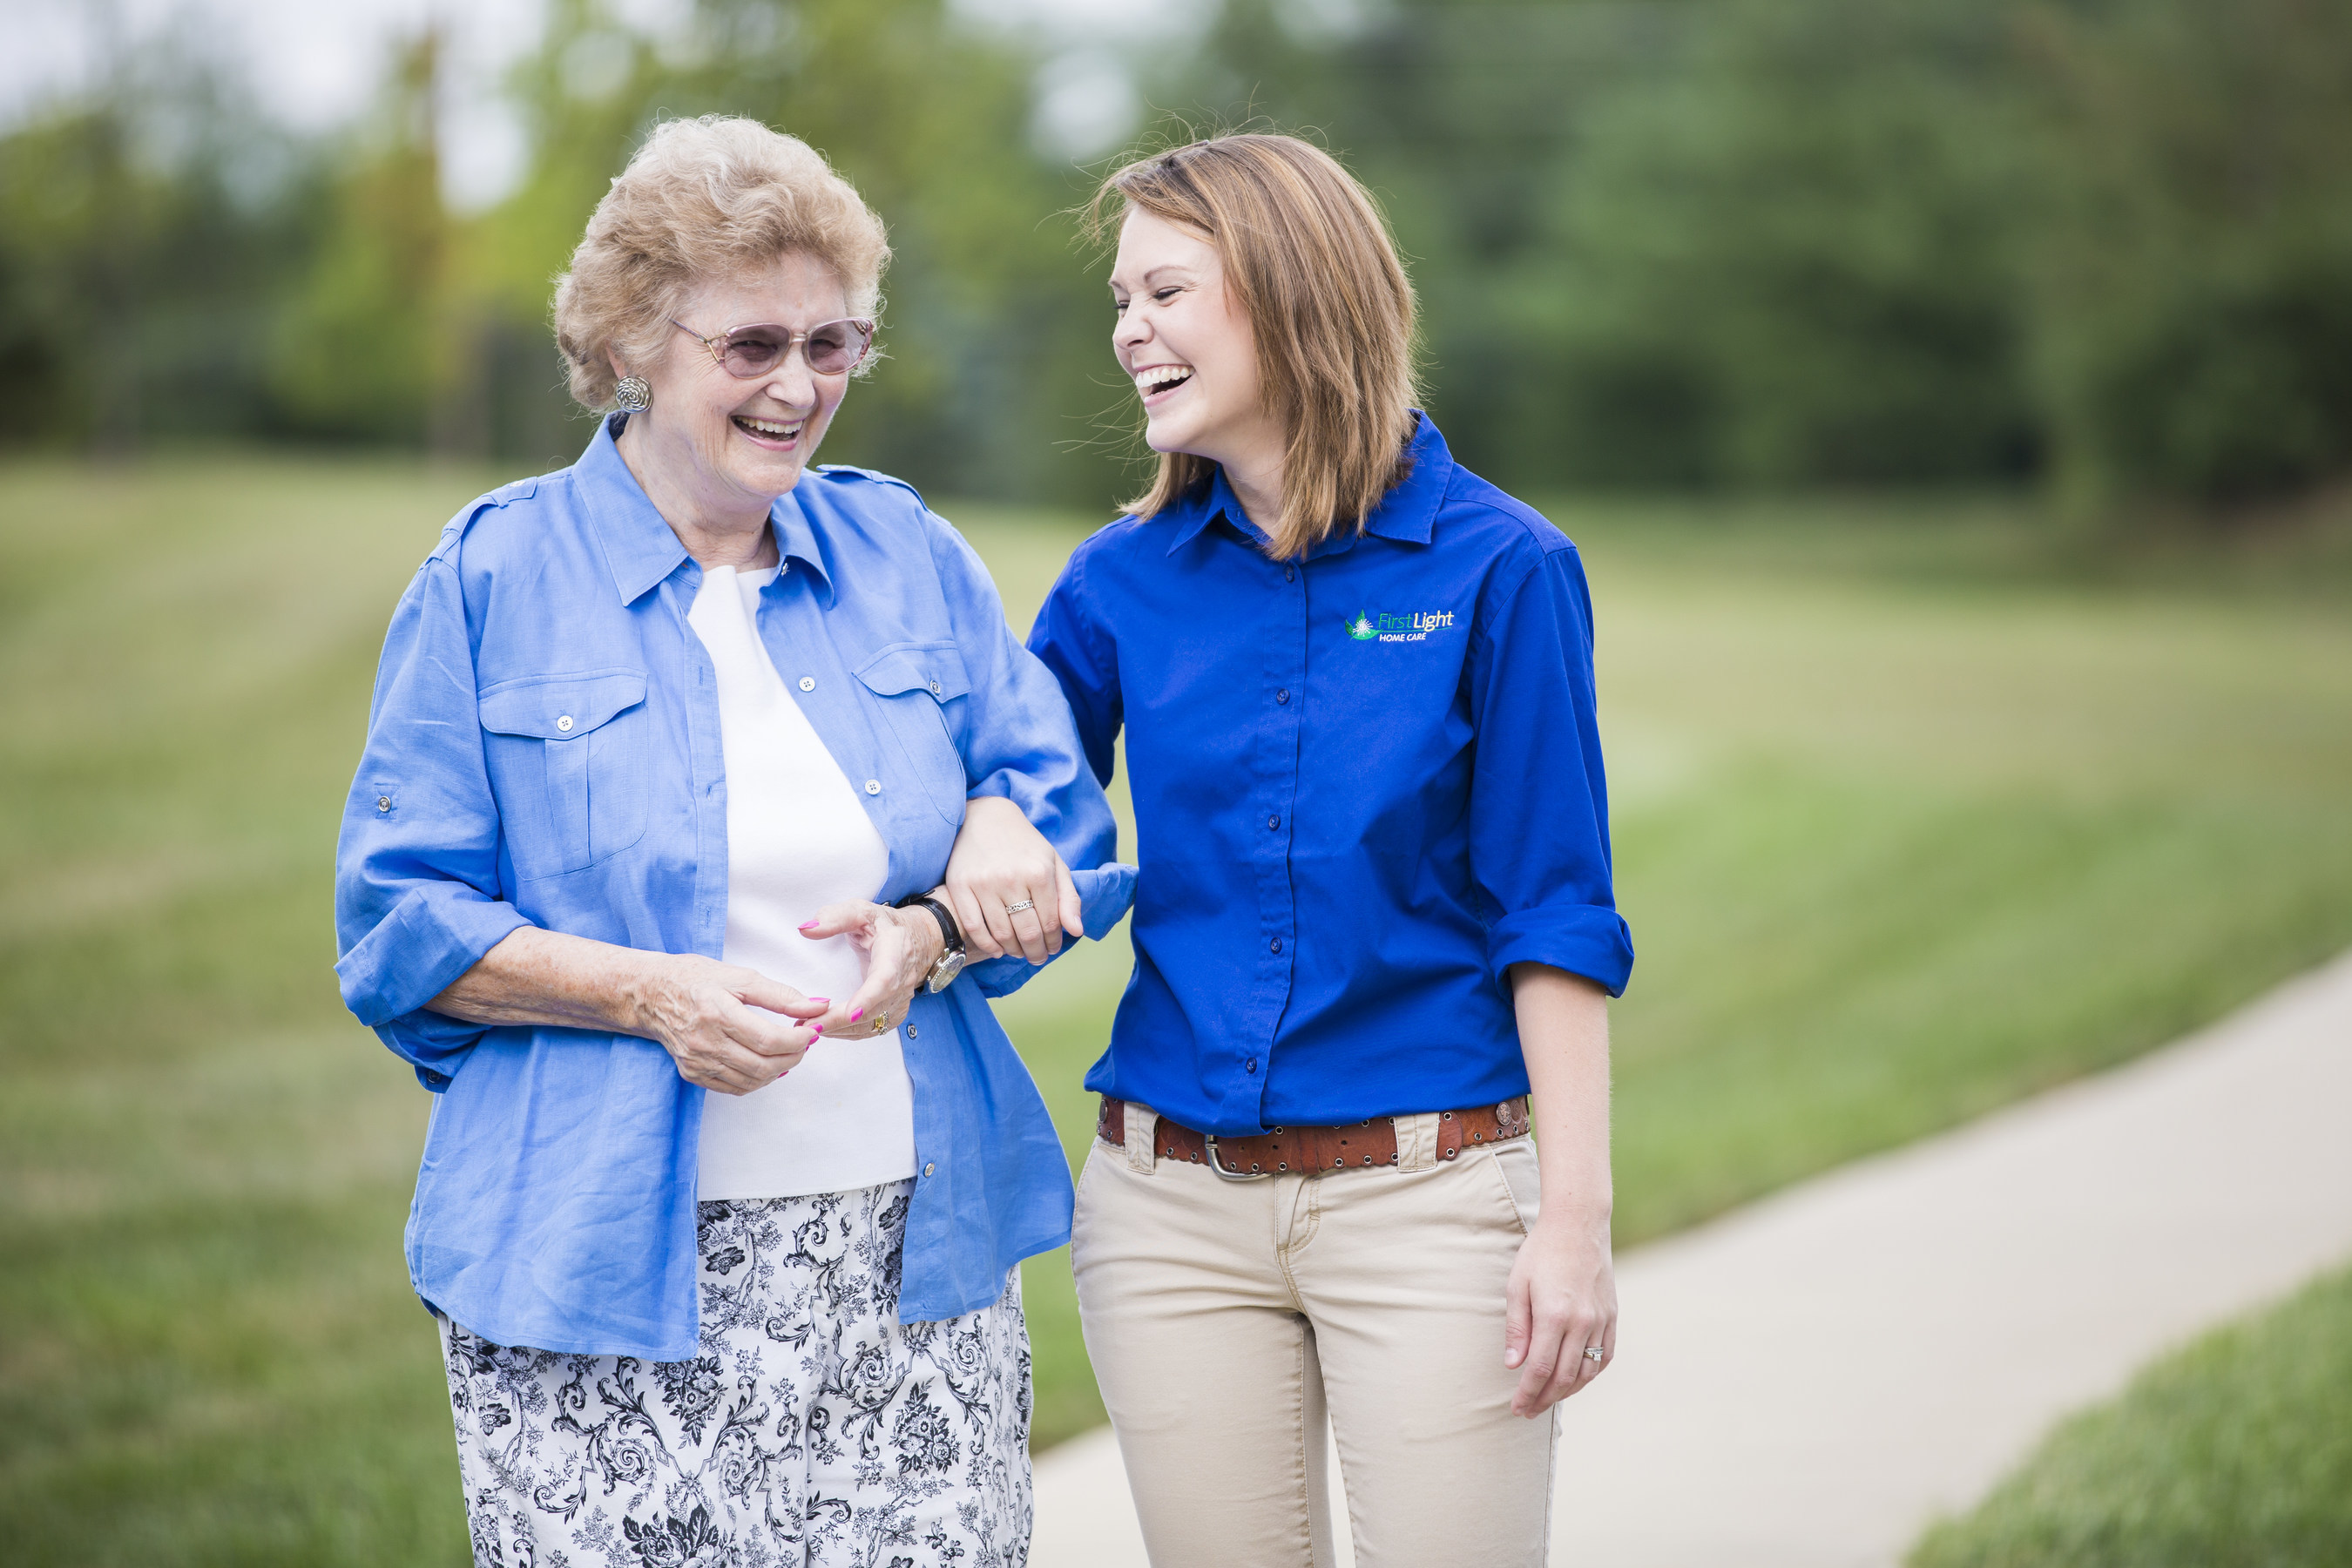 FirstLight Home Care provides a range of non-medical in home care solutions to adults aged 18+